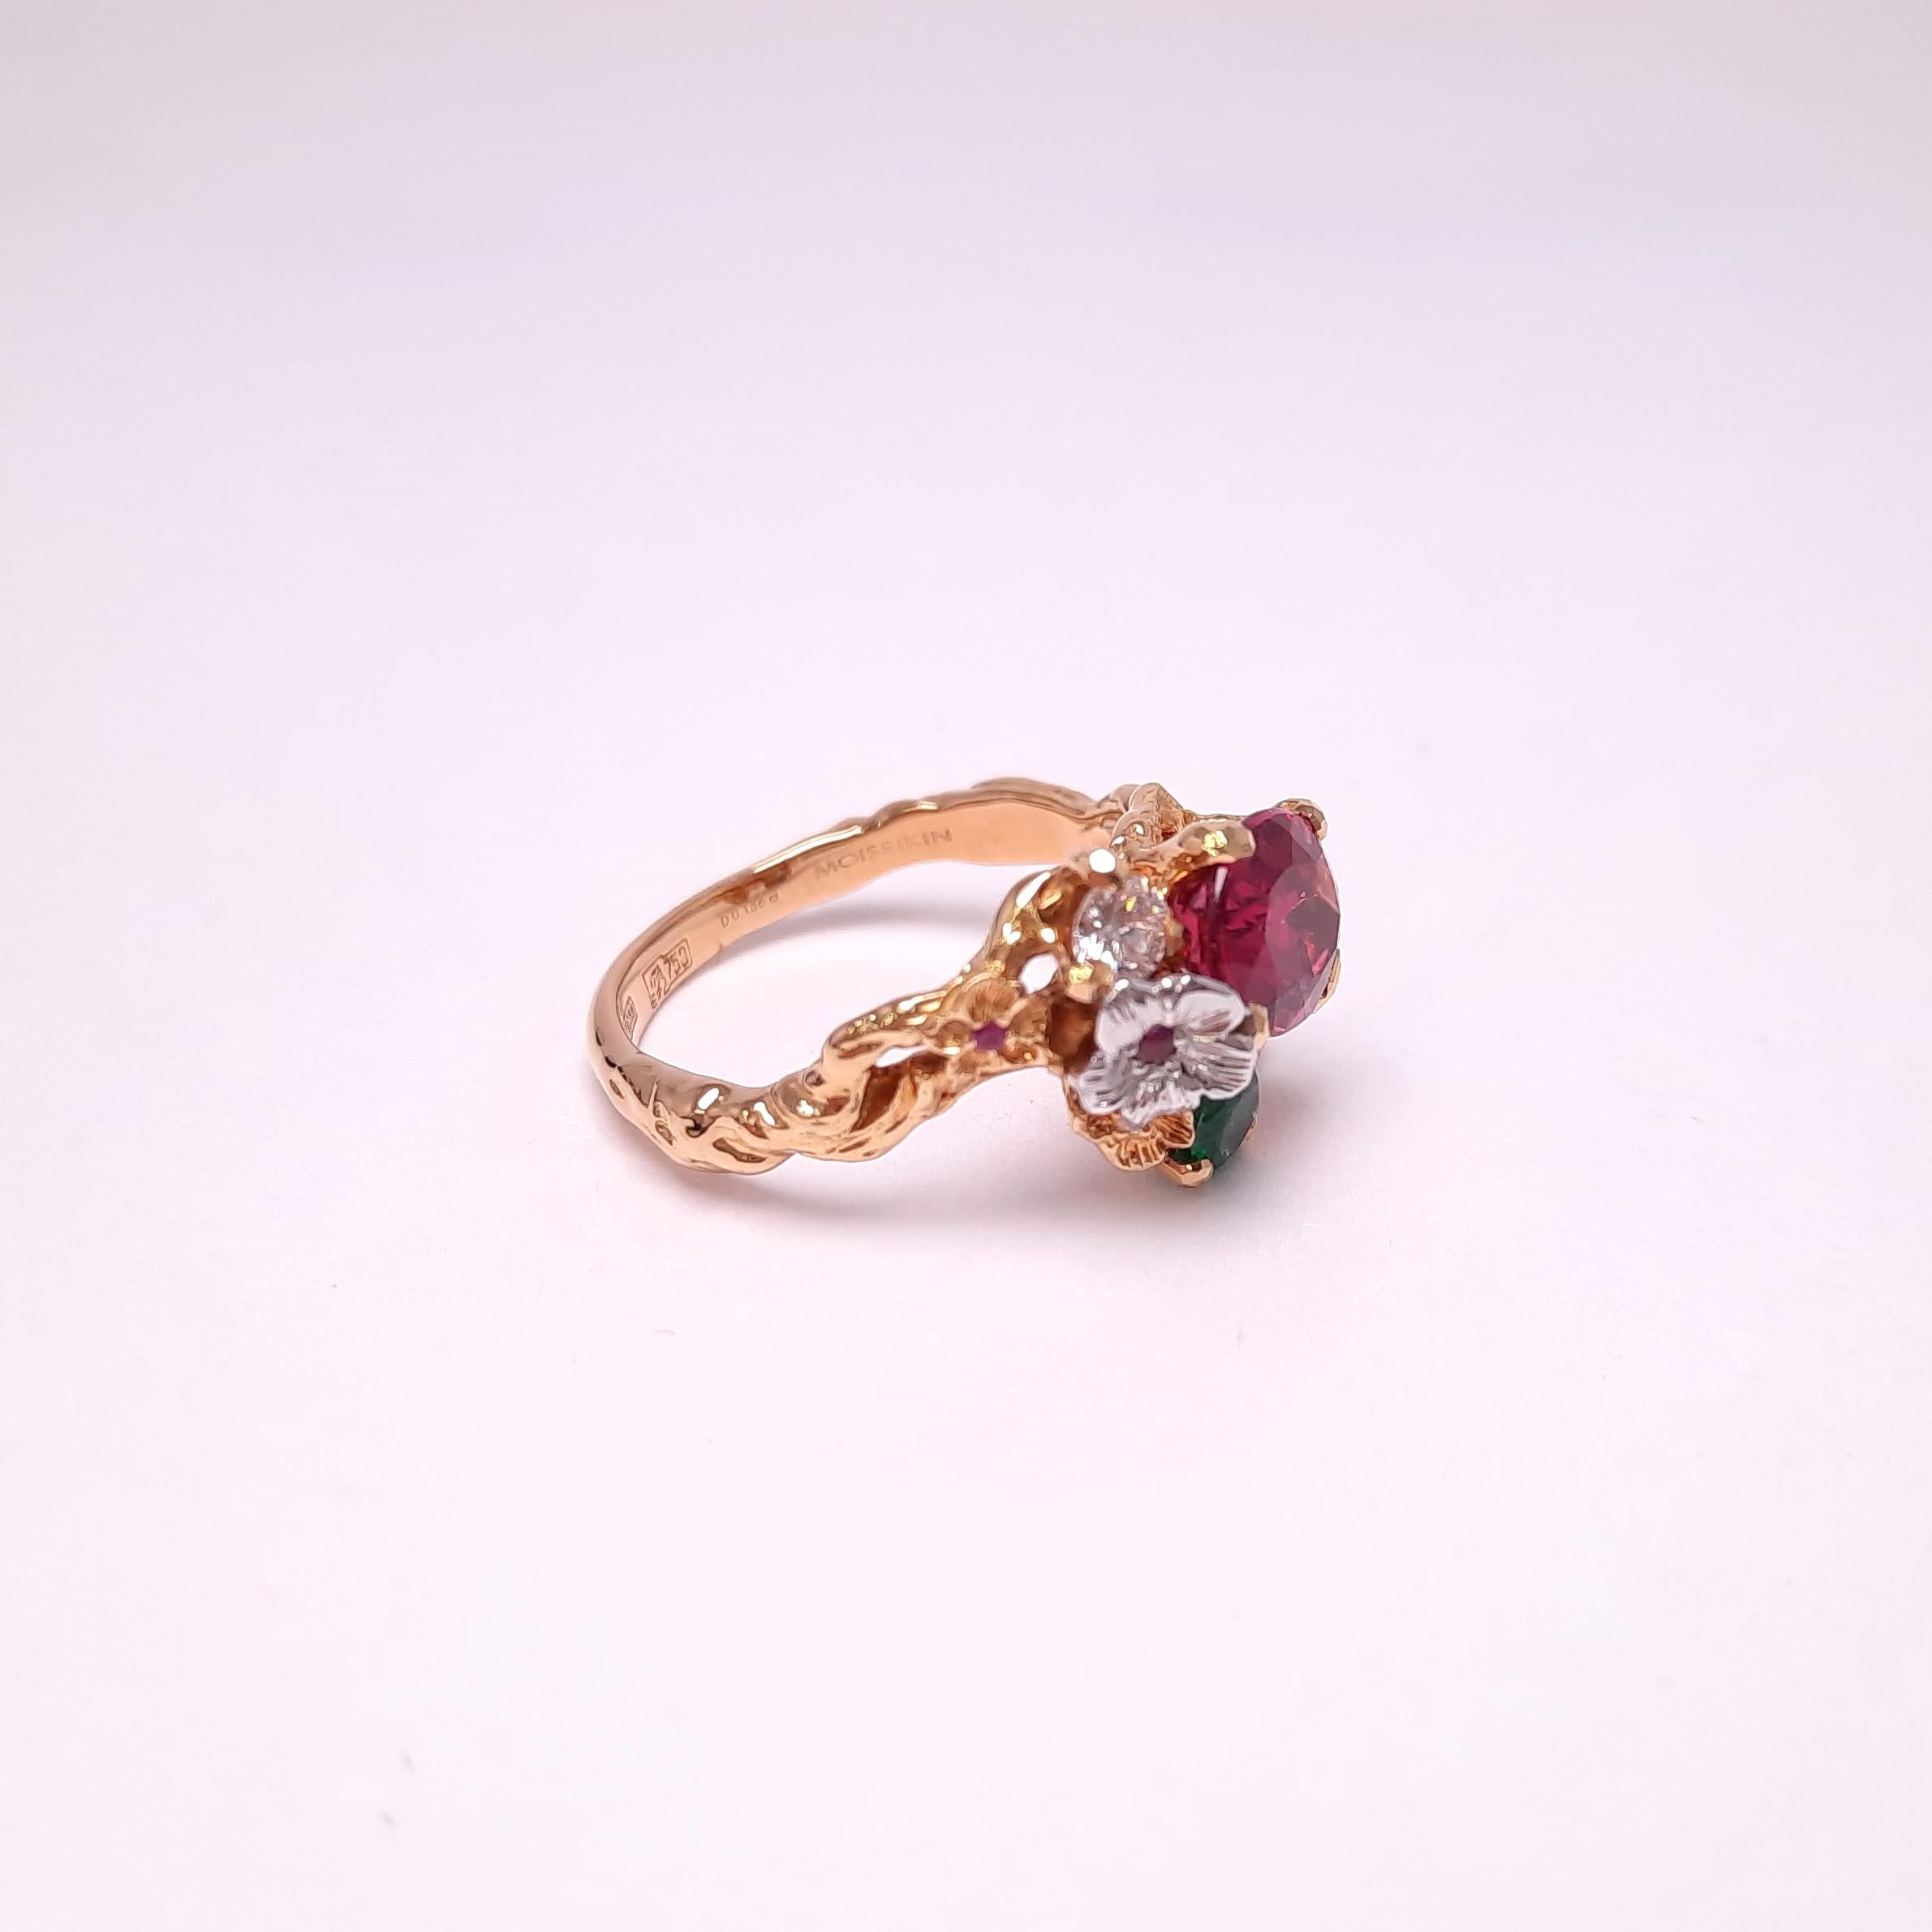 Inspired by Impressionism, MOISEIKIN® has created a blooming flower ring with a vivid emerald and a deep pink tourmaline in a tridimensional manner. Trembling flowers made of gold hold gemstones as if gems are ripe fruits and a sweet fragrance. The